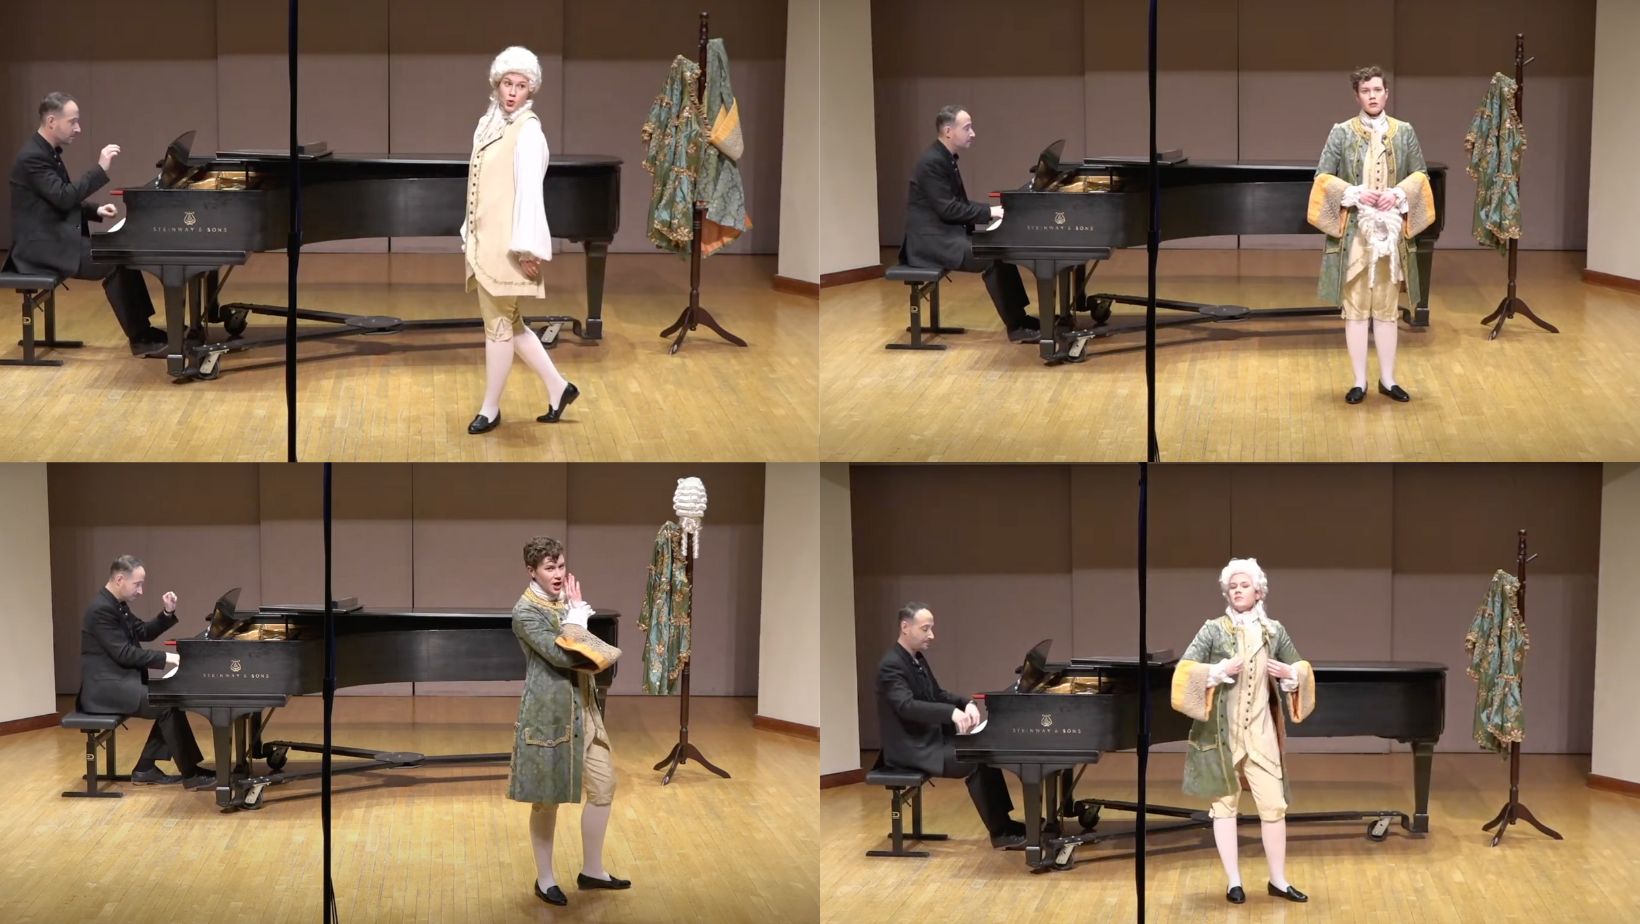 A collage of four photos, showing a white genderqueer person performing in front of a piano. They wear 18th century menswear, and in two of the photos they wear a curly white historical wig.